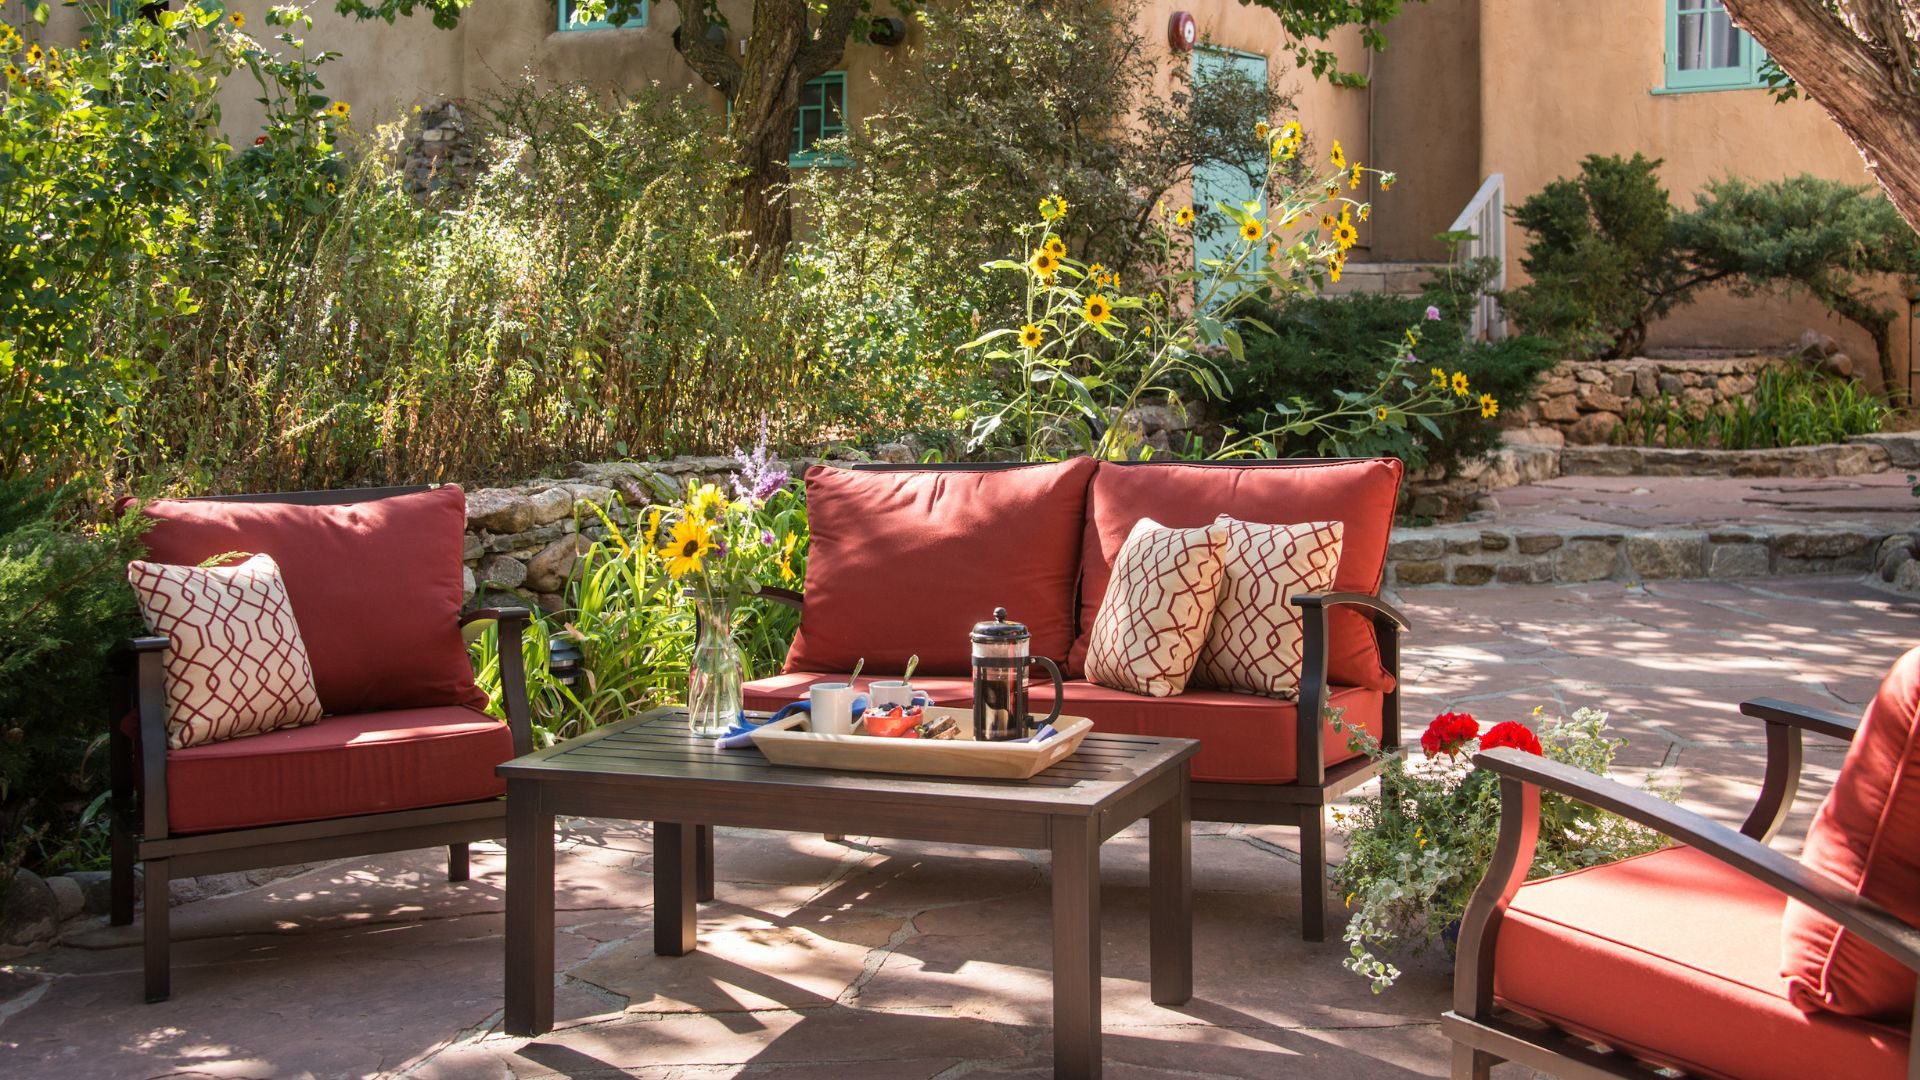 Patio furniture with rust colored cushions, printed pillows, a coffee table topped with beverages, surrounded by lush landscaping